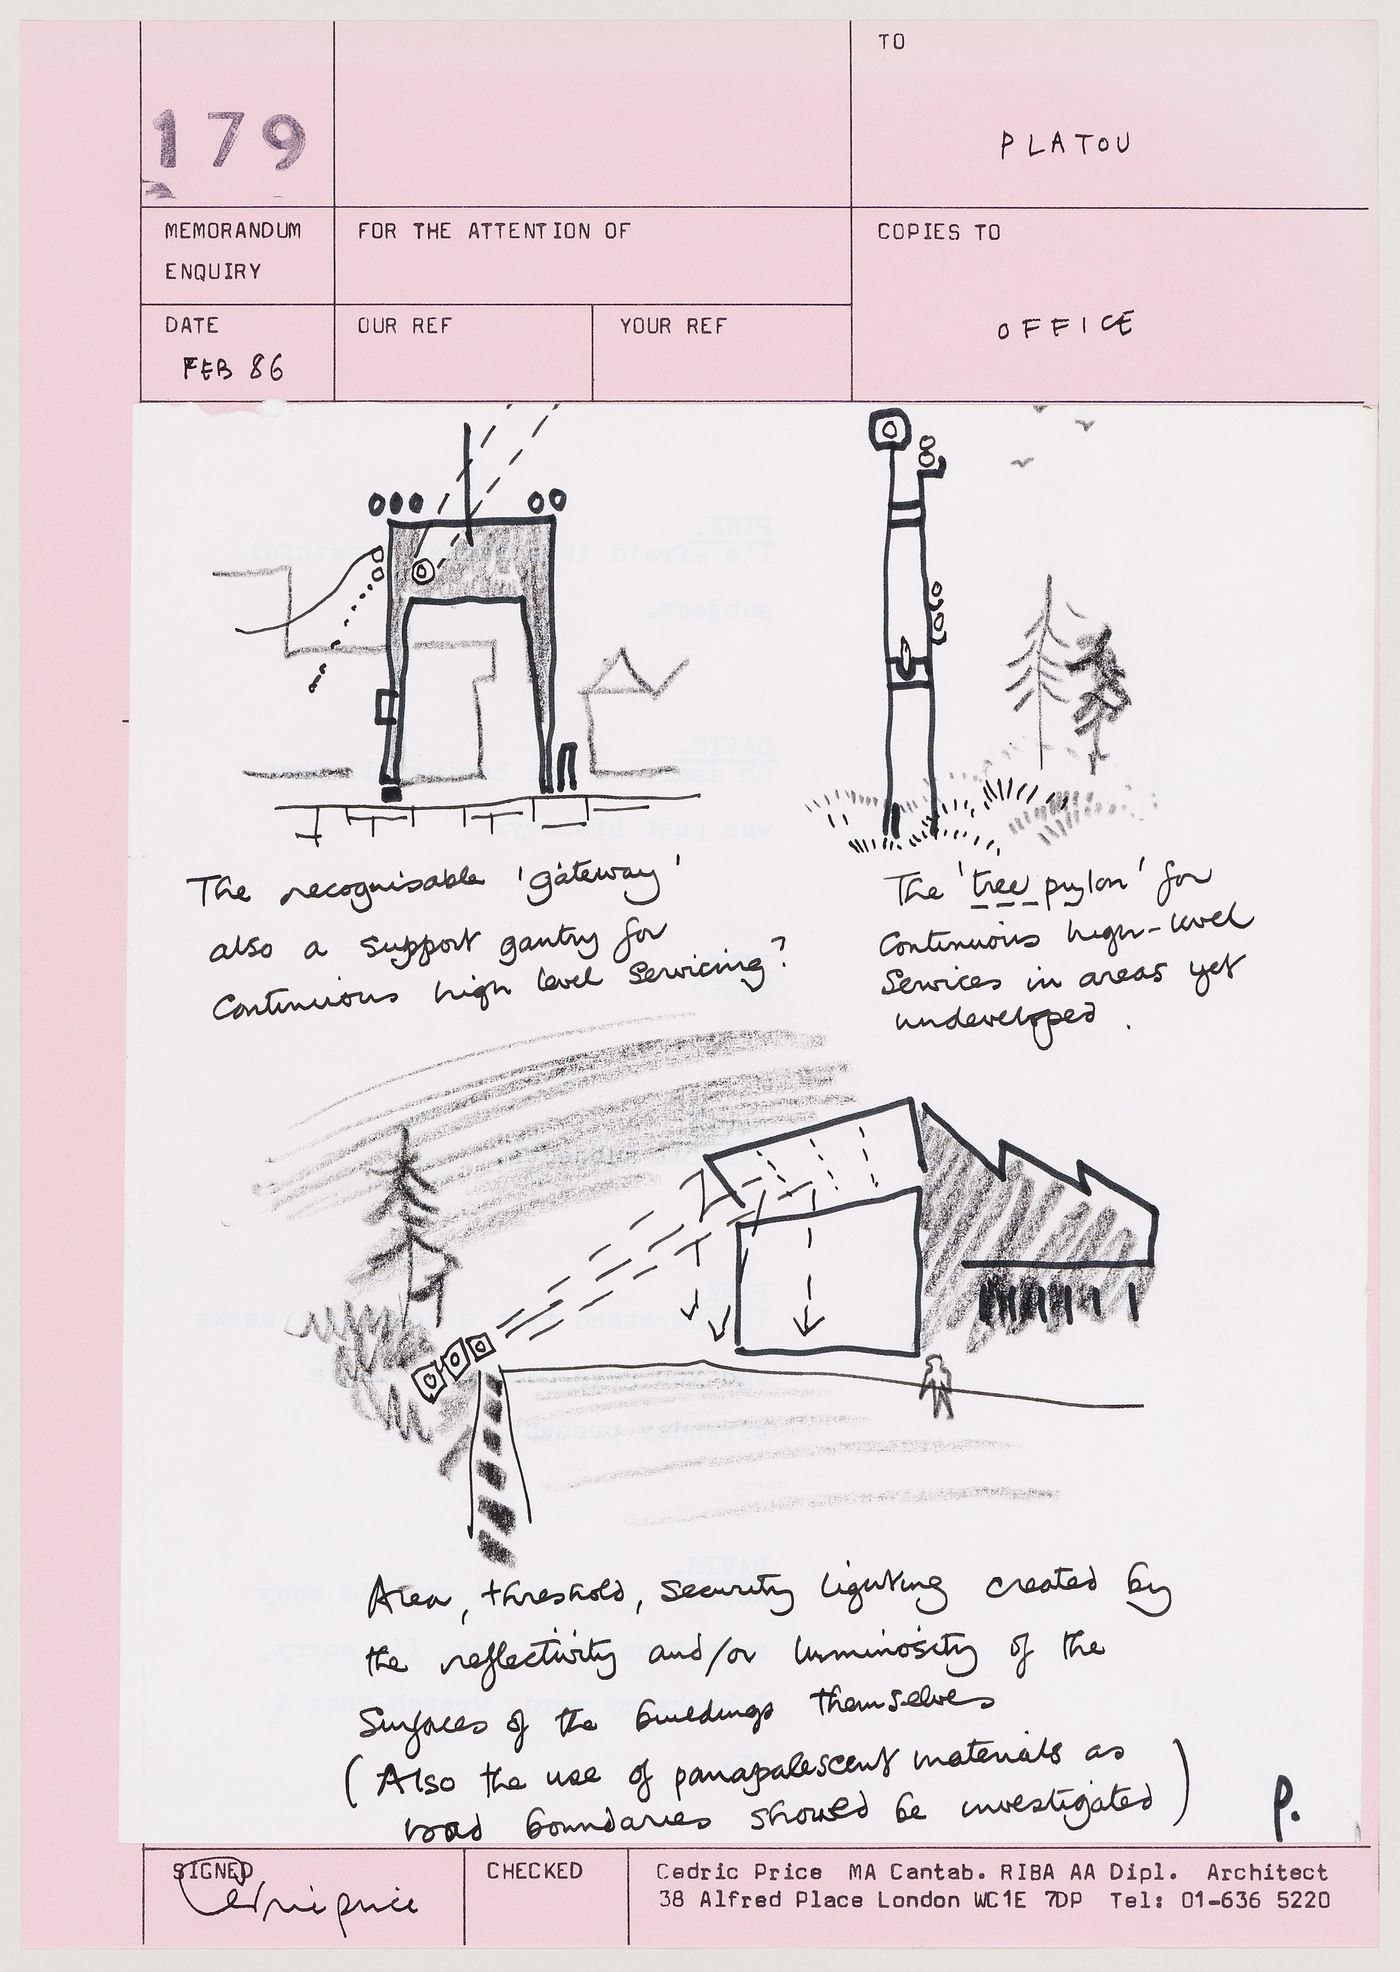 Ski: sketches and notes for a gateway, a tree pylon, and area, threshold and security lighting